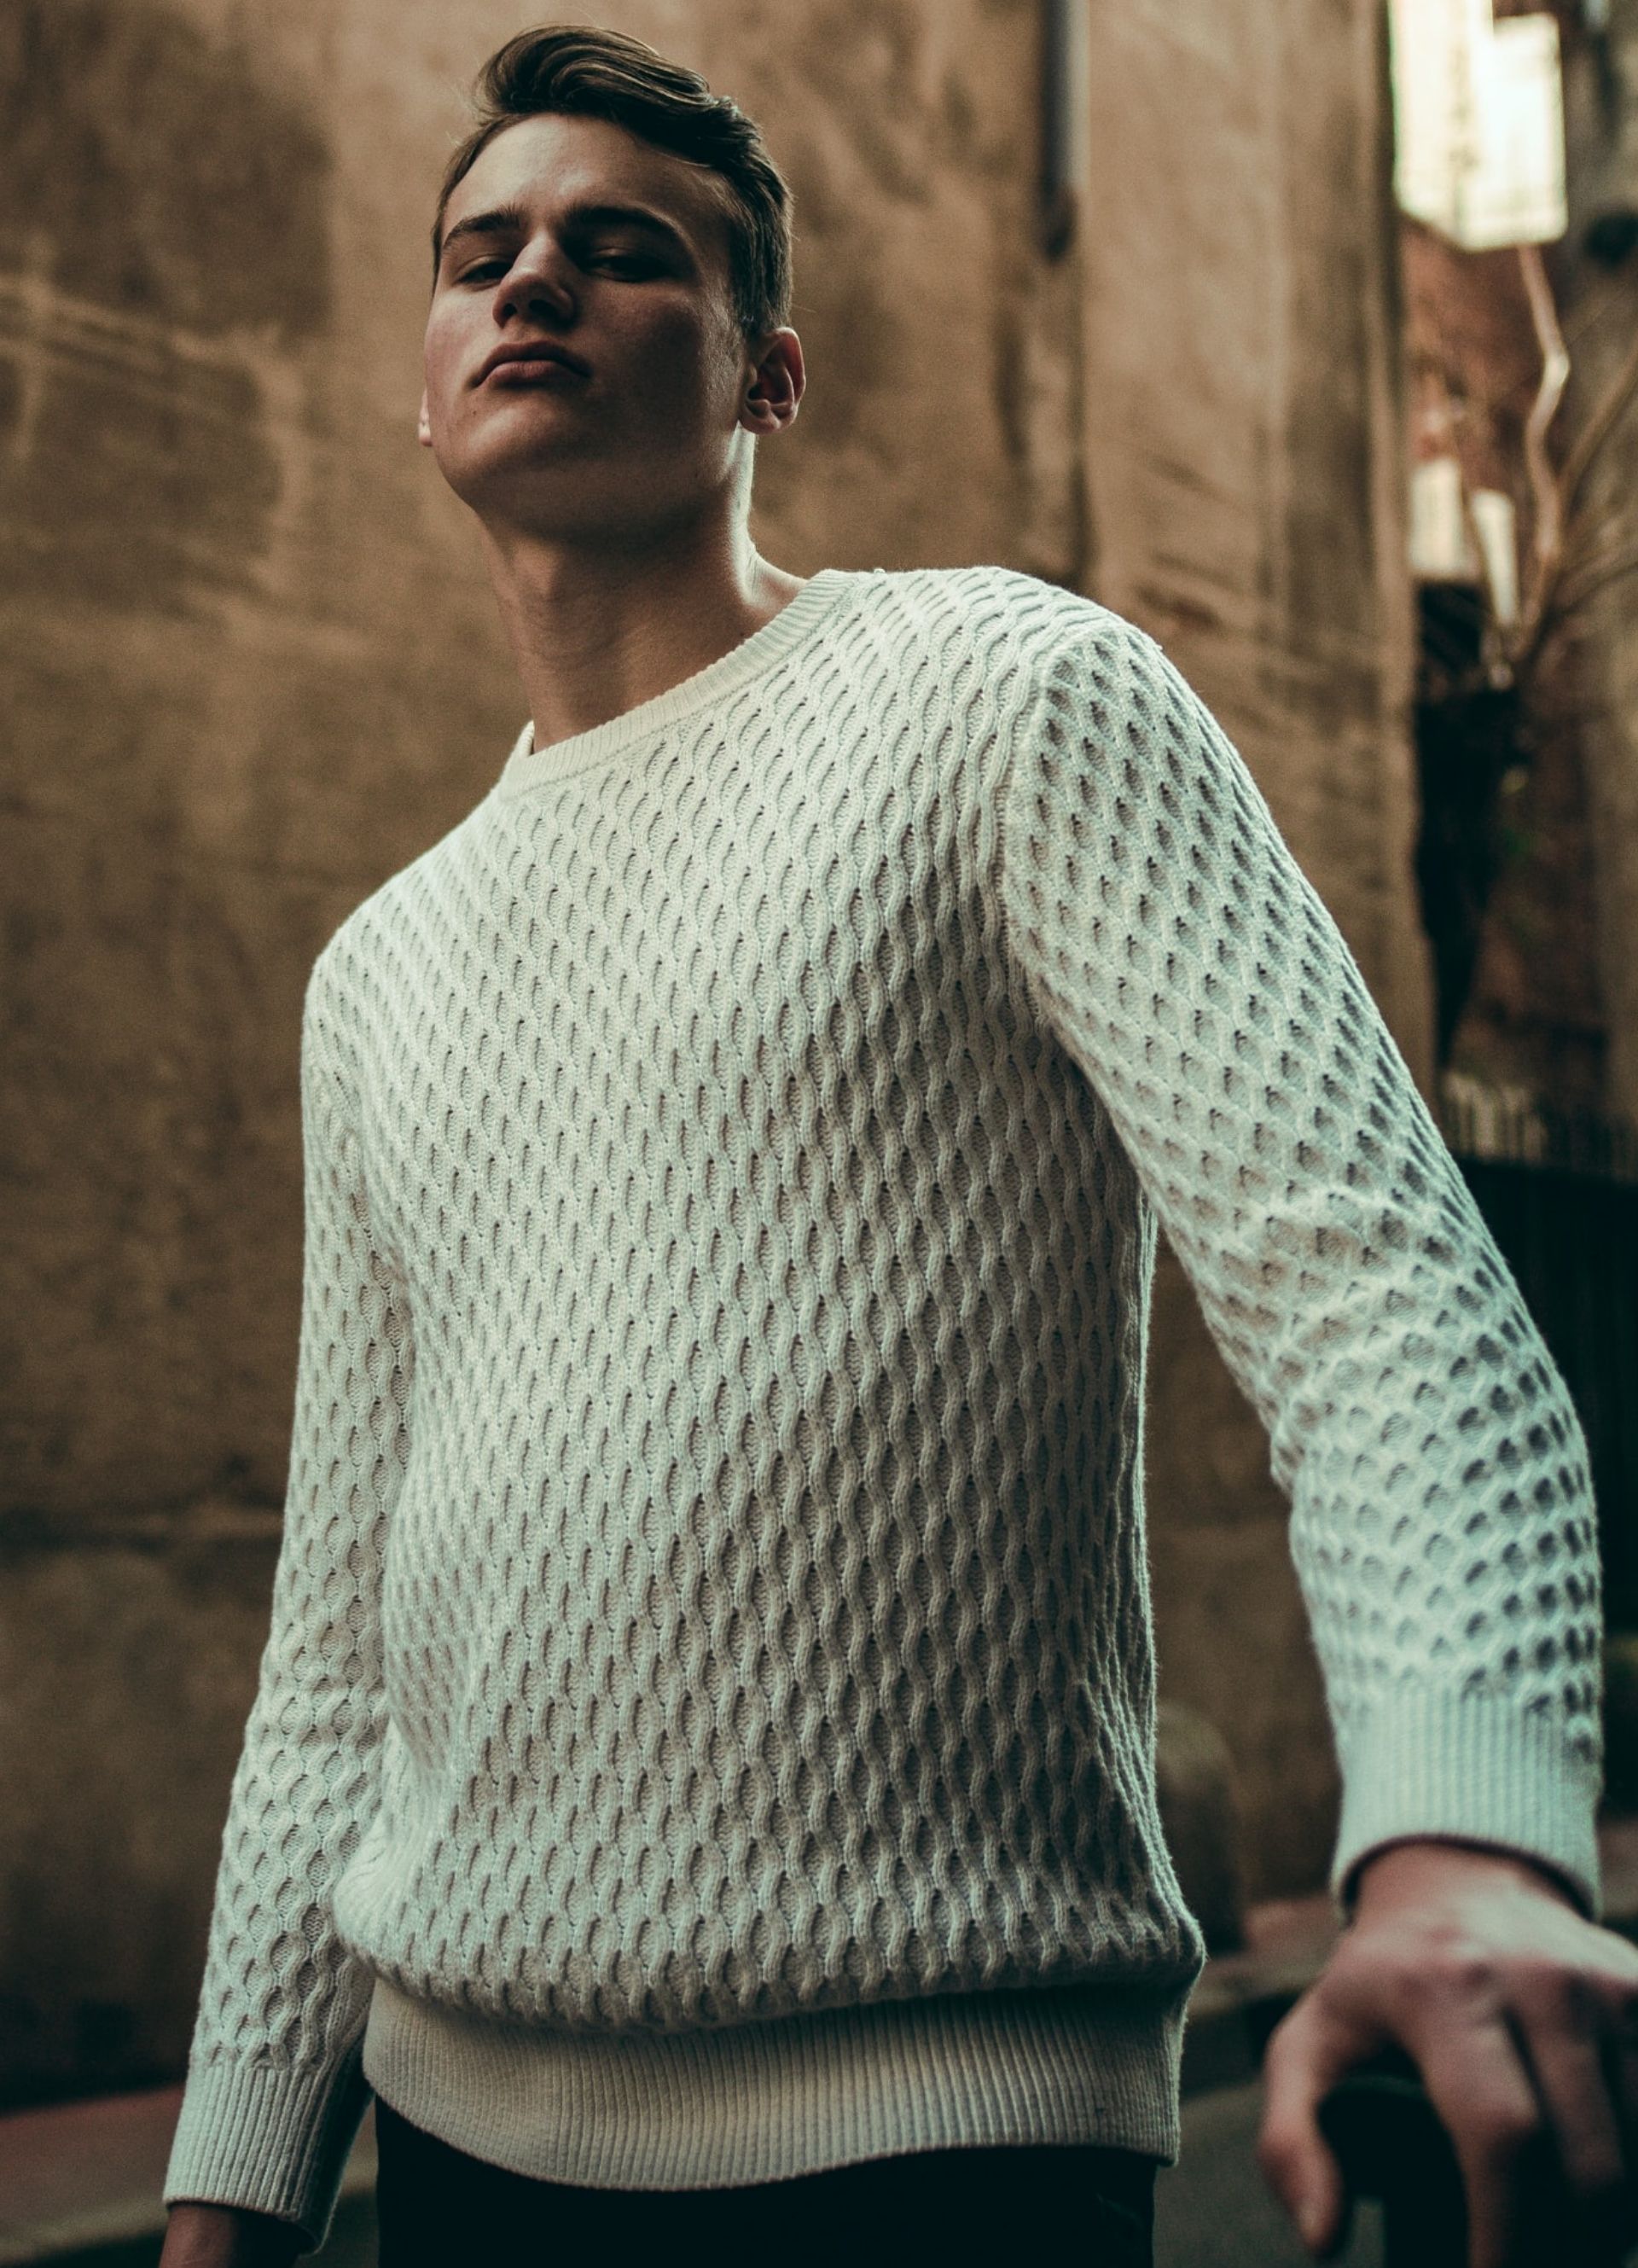 Knitwear and chunky knitwork for AW21. Photo by perchek_industrie, Unsplash